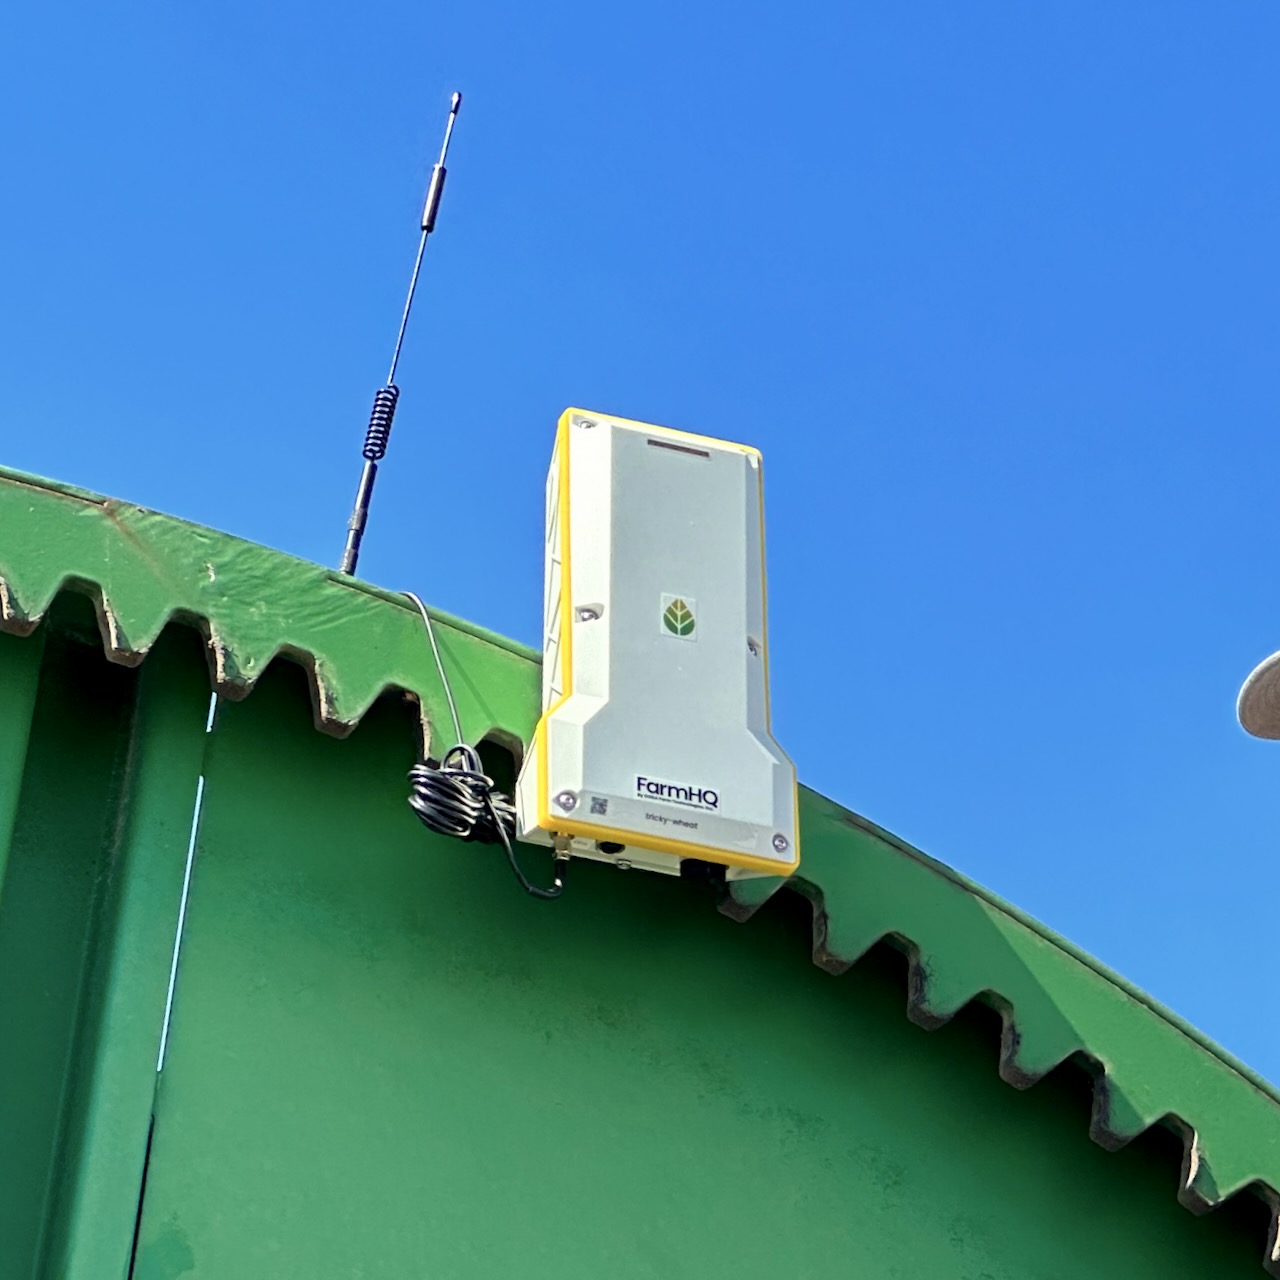 FarmHQ TC-3 irrigation monitoring and control device showcasing its independent cellular connection enabled by a high gain antenna